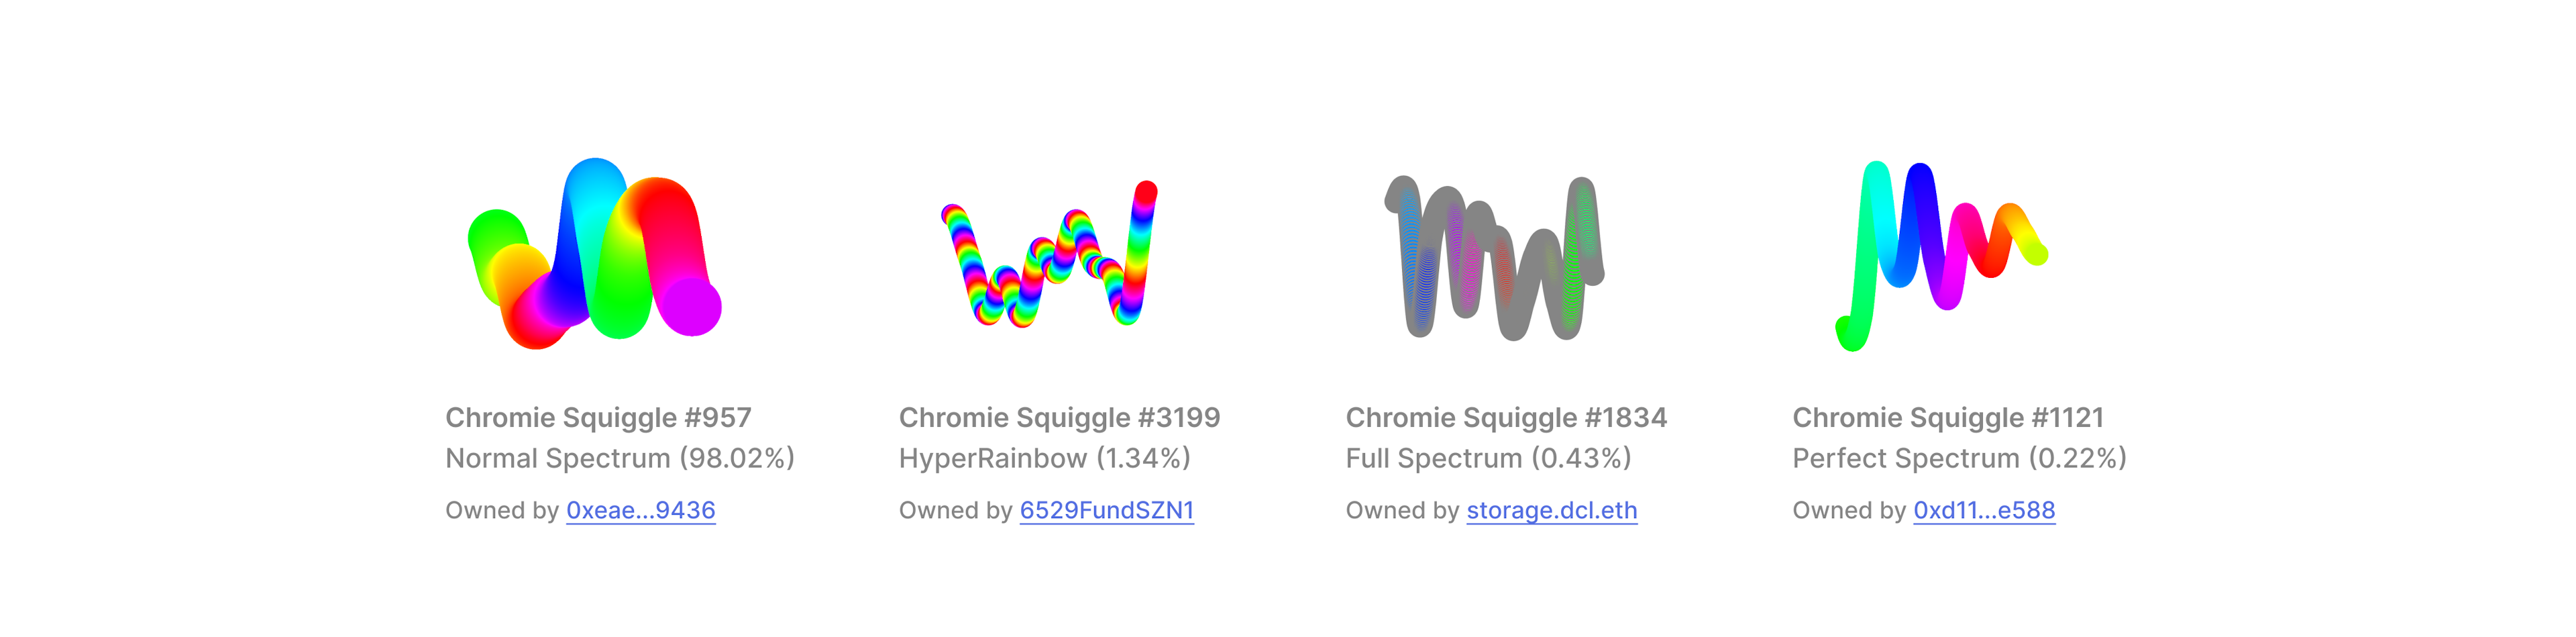 Four Chromie Squiggle Spectrums